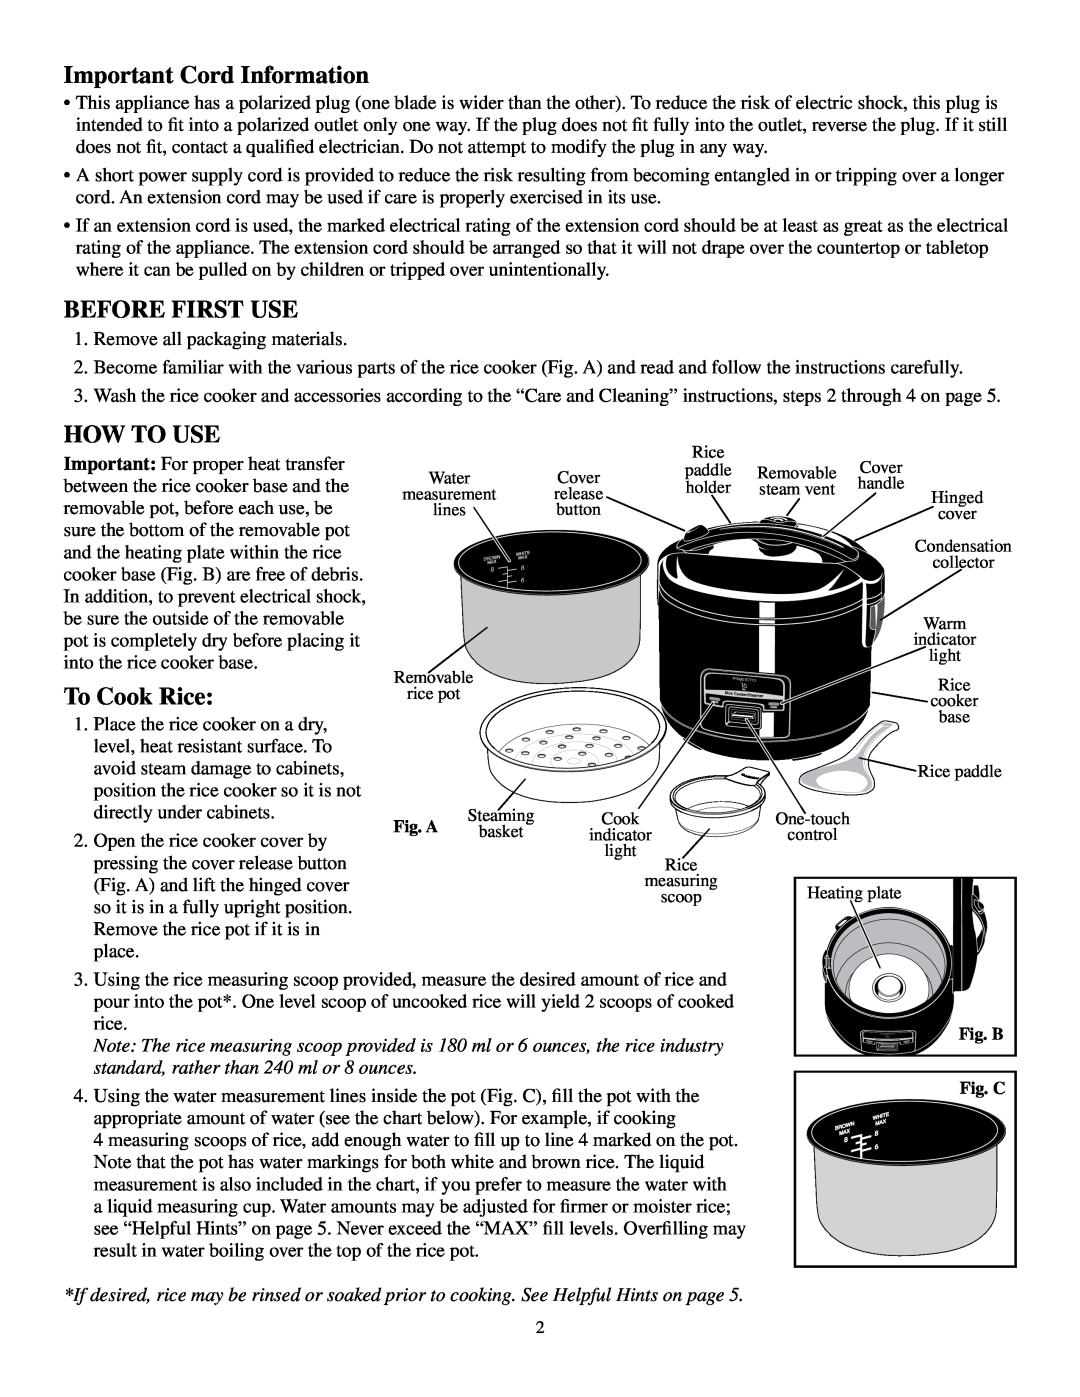 Presto Rice Cooker manual Important Cord Information, Before First Use, How To Use, To Cook Rice 